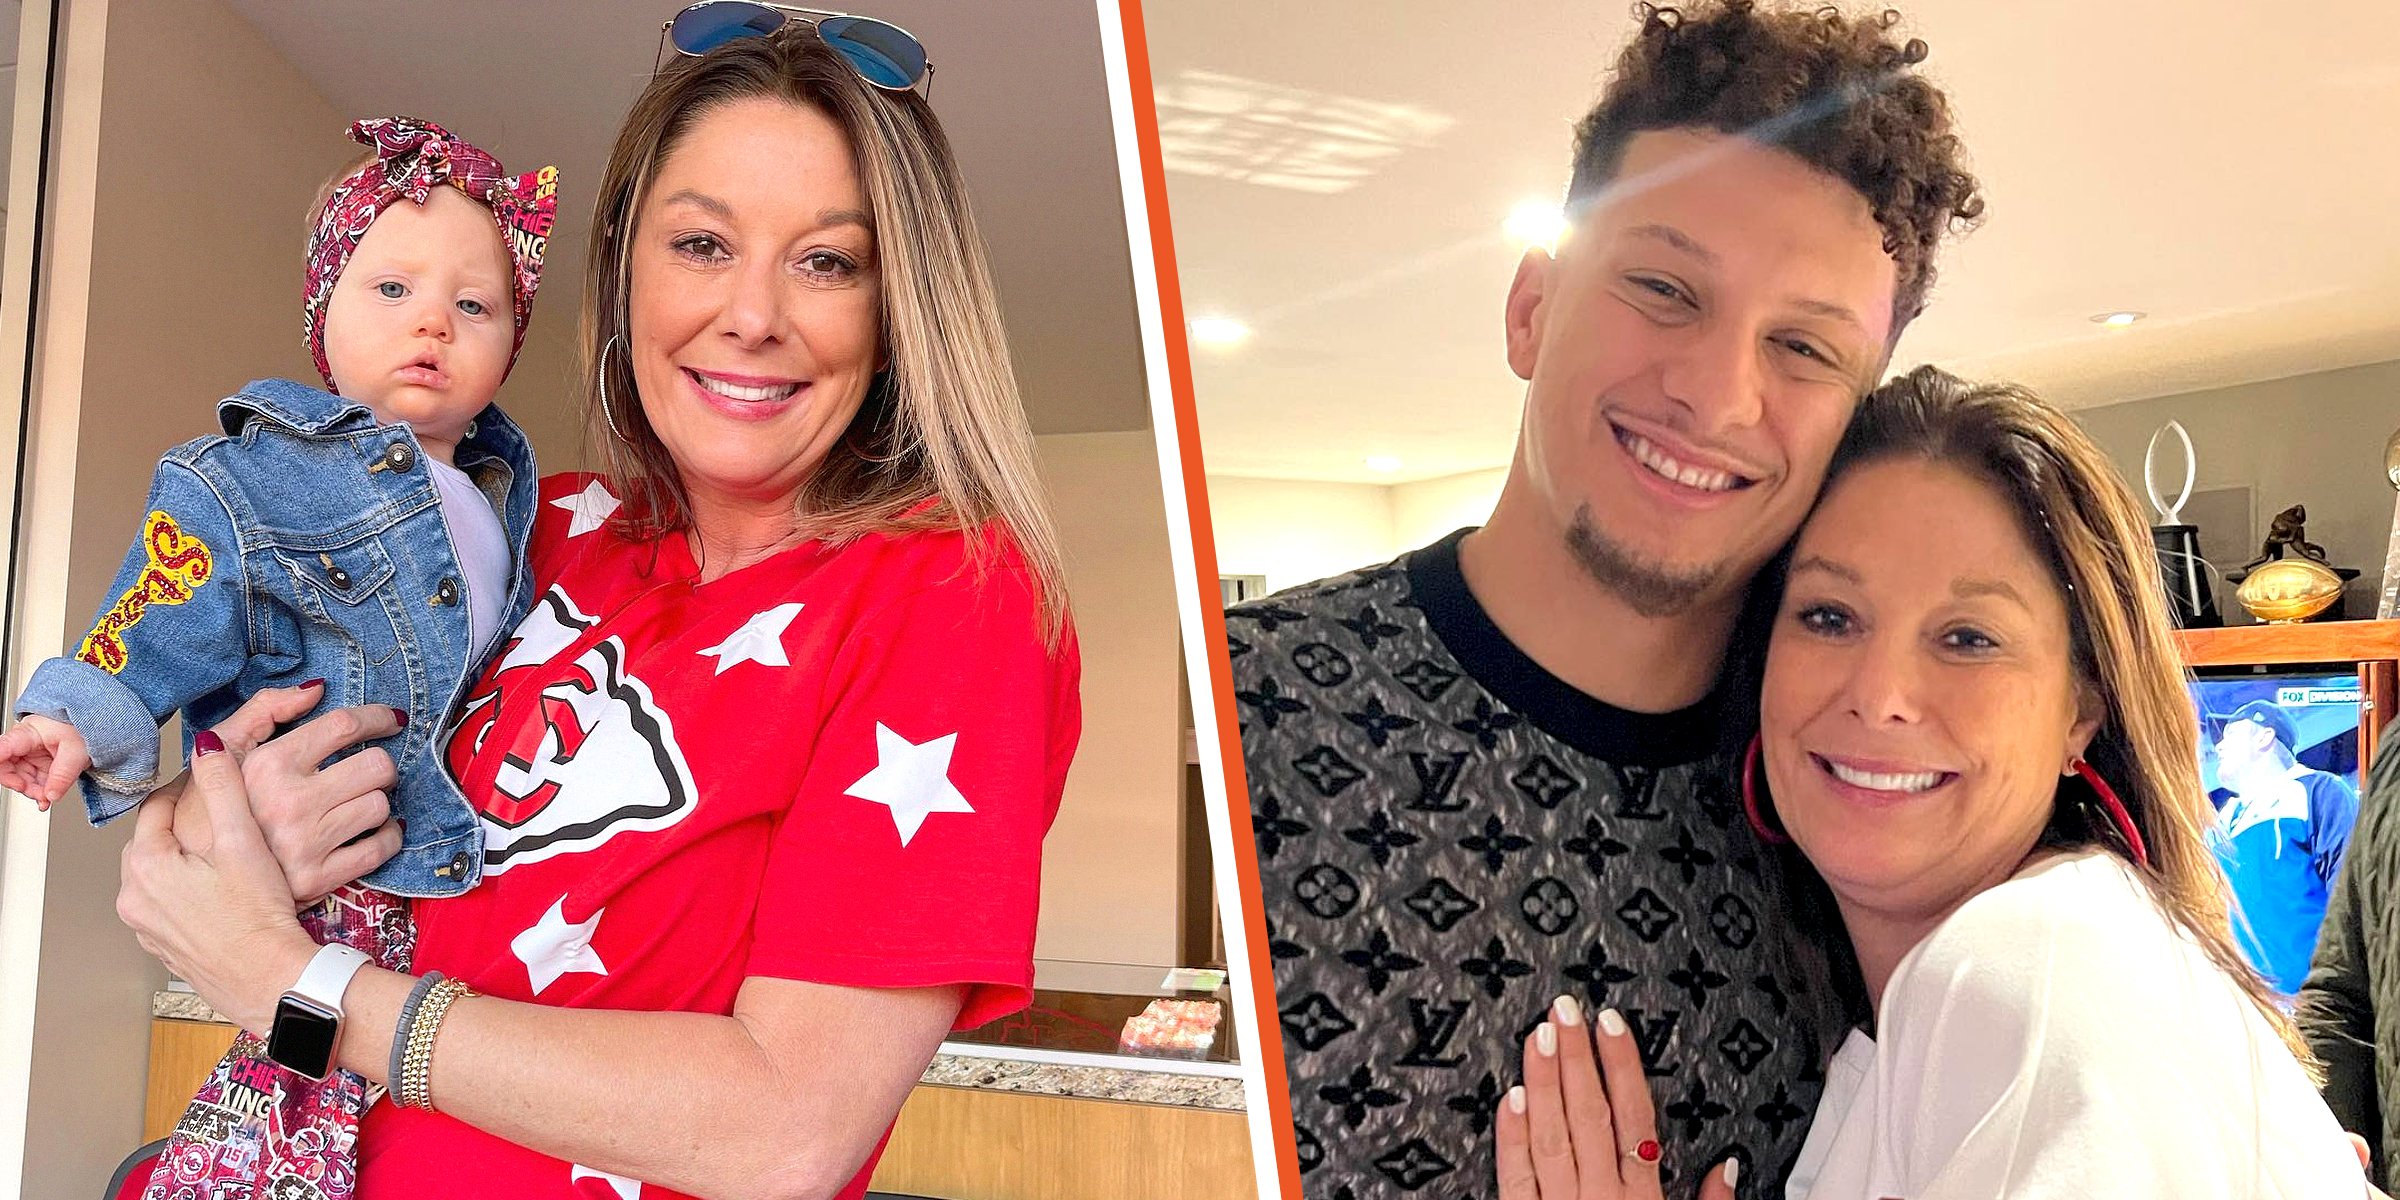 As the Chiefs ride out to face off agains the Jets, Patrick Mahomes Mom Randi shares an adorable picture of her family ahead of the match.